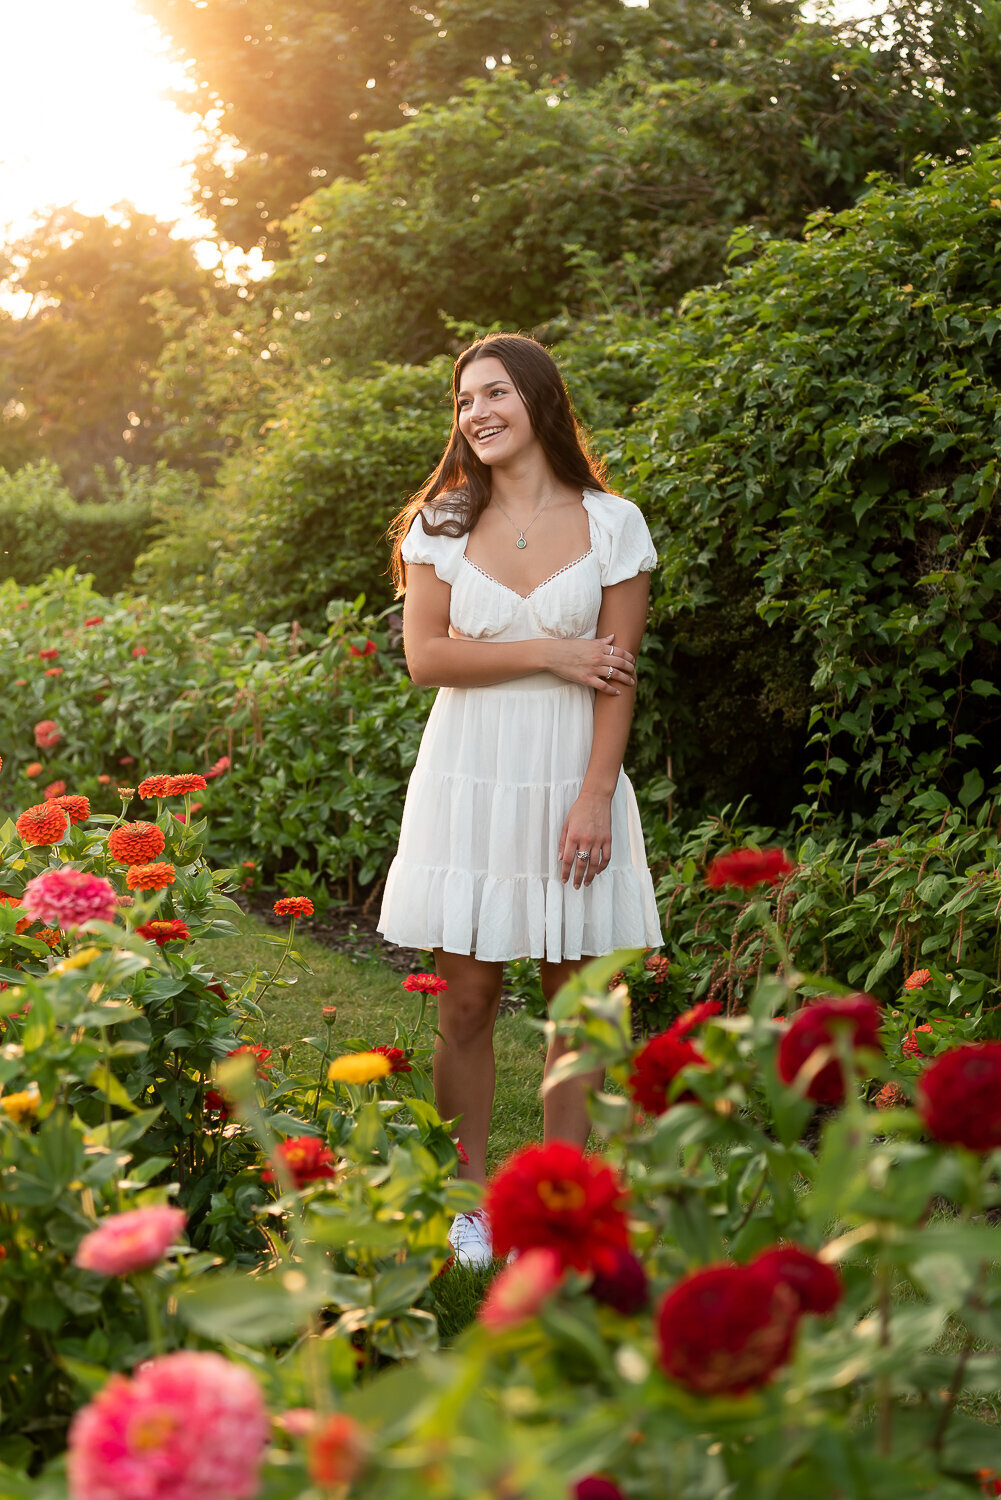 Senior smiling off camera in garden at Harkness Park for high school photos |Sharon Leger Photography | Canton, CT Newborn & Family Photographer